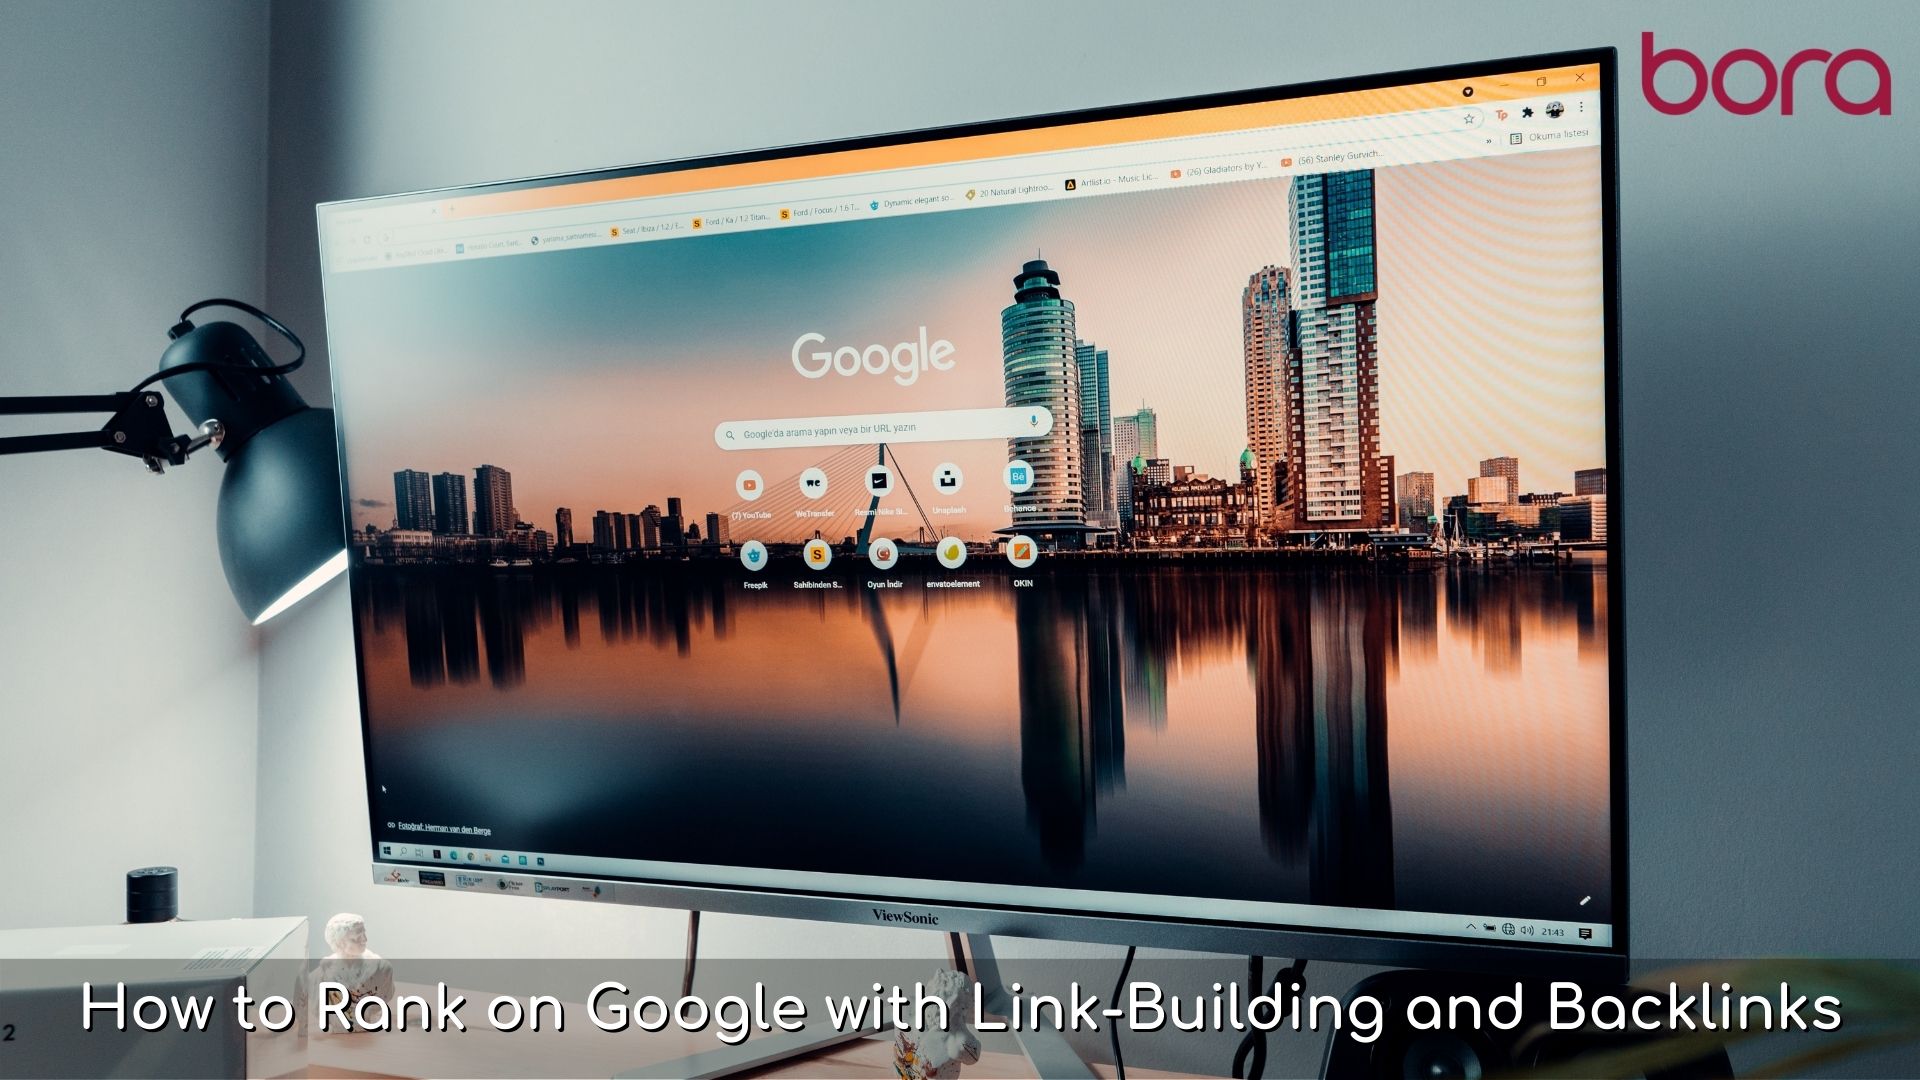 How to Rank on Google with Link-Building and Backlinks